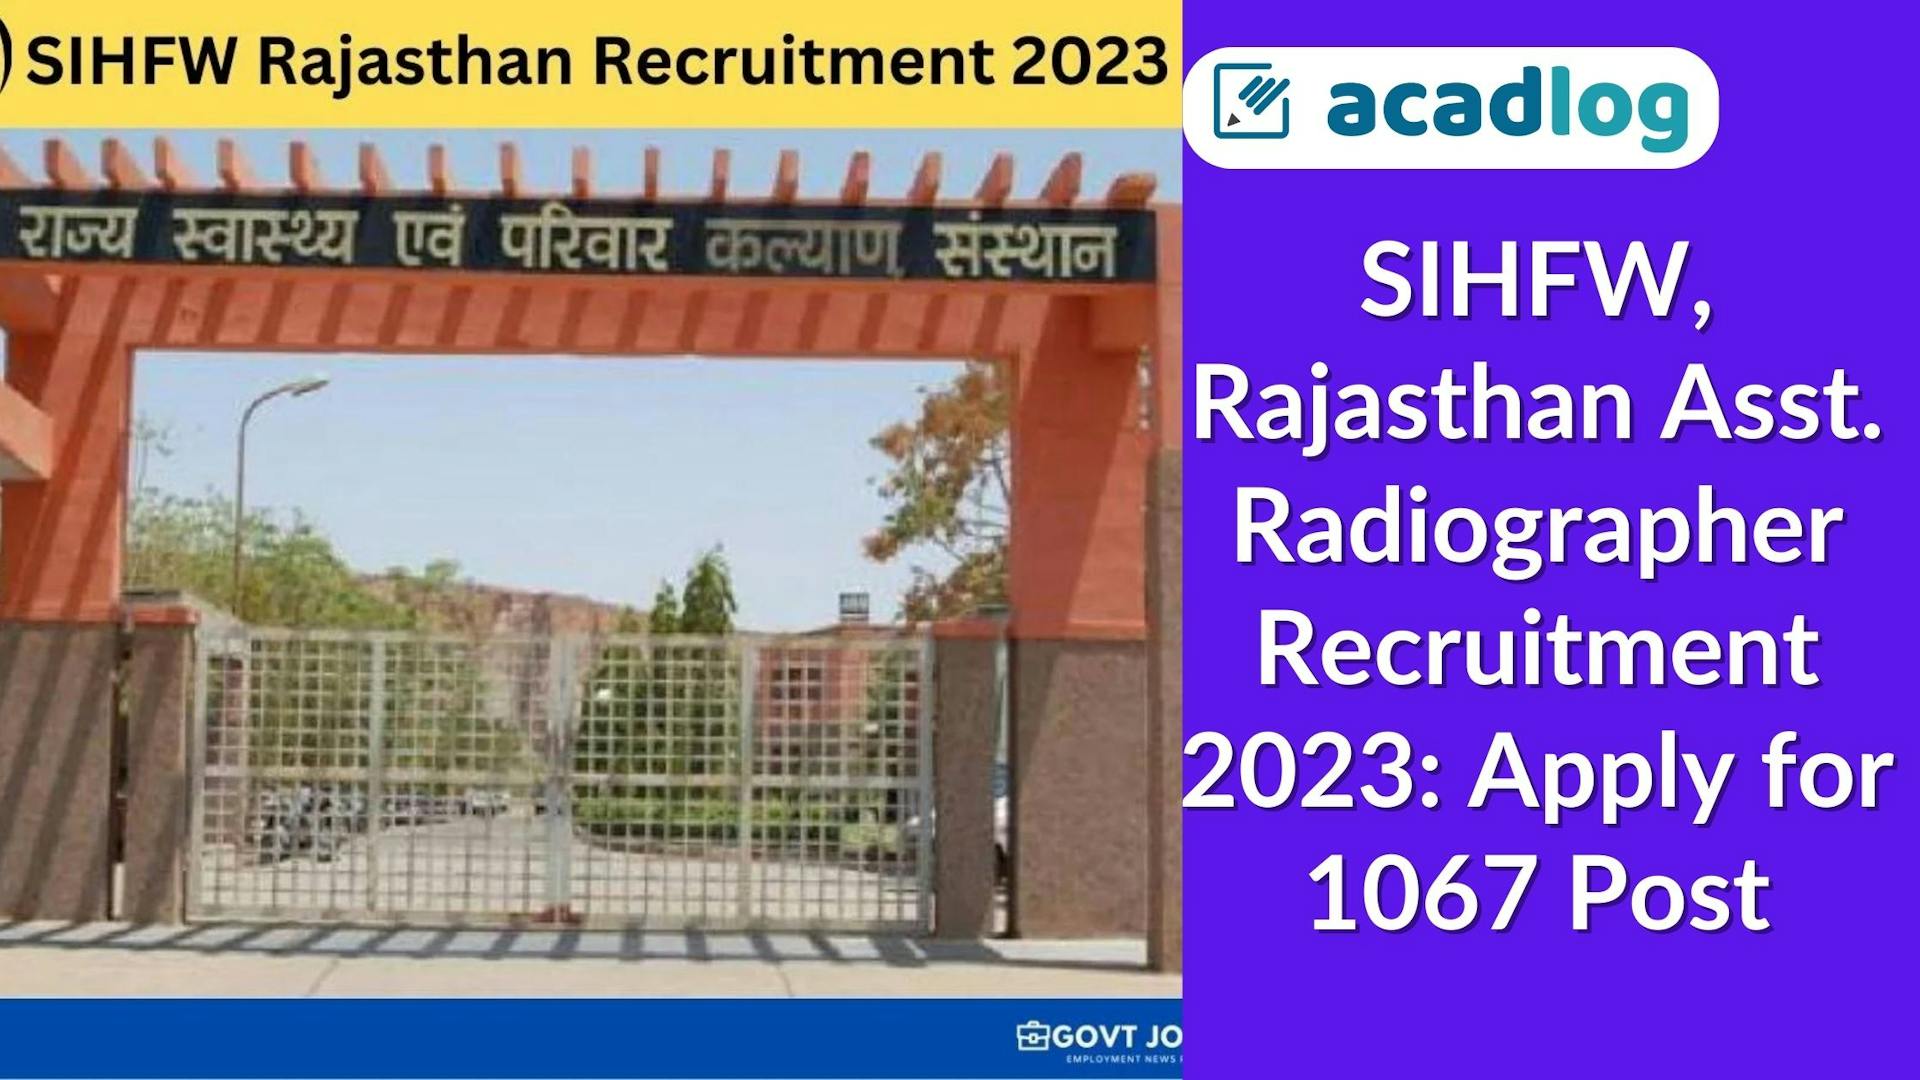 SIHFW, Rajasthan Asst Radiographer 2023 Online Form : Apply for 1067 Post